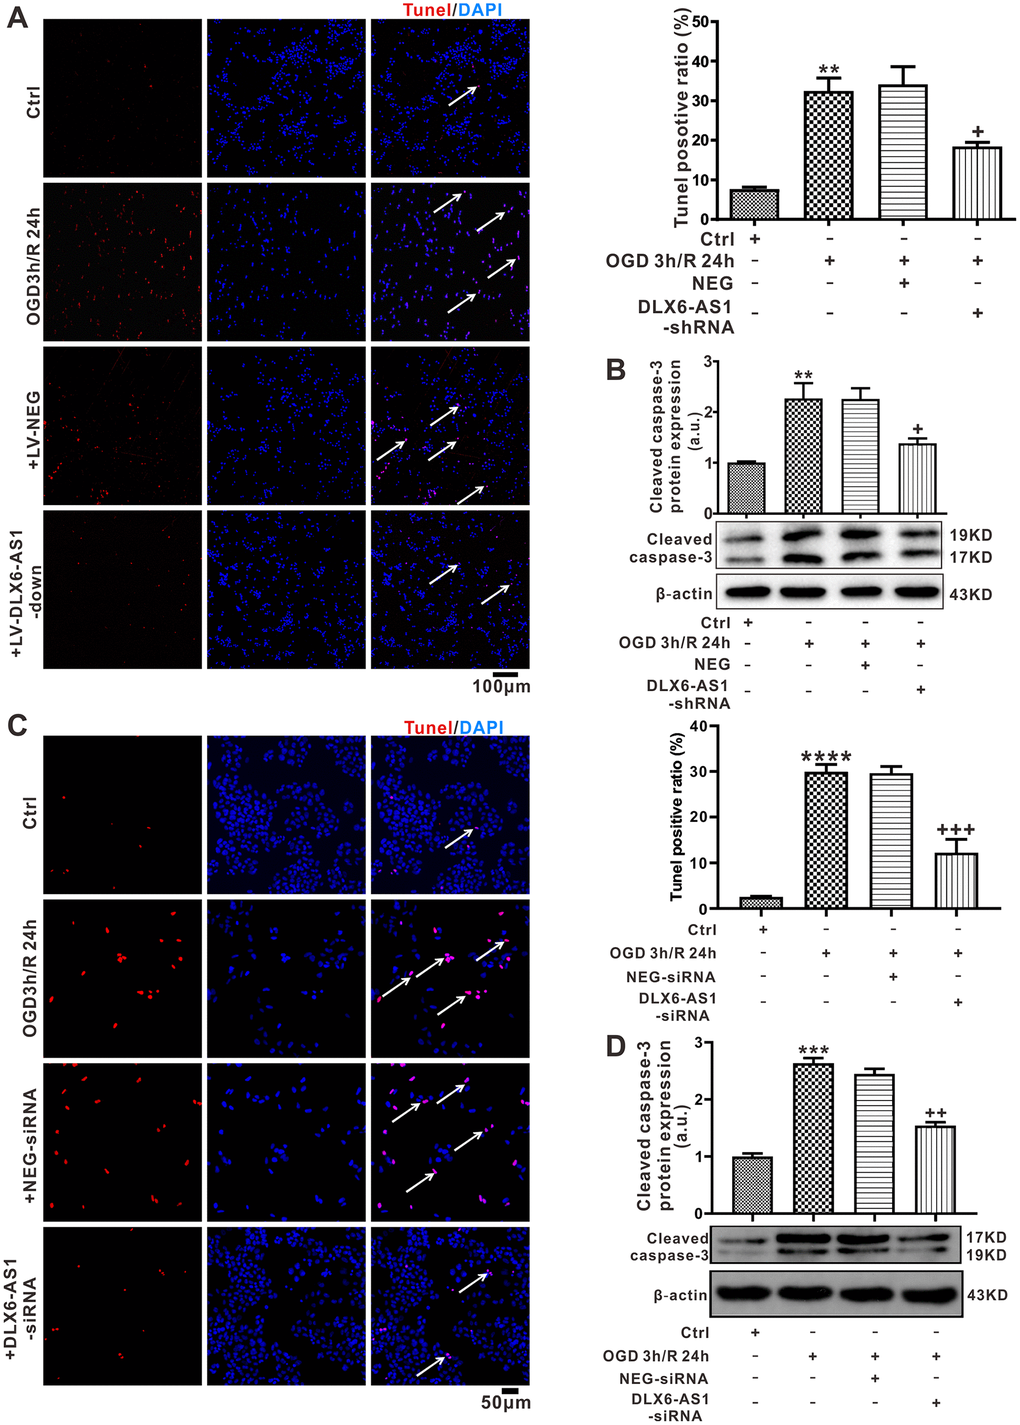 DLX6-AS1 was upregulated in an OGD/R model and DLX6-AS1 silencing reduced apoptosis of N2a and SH-SY5Y cells induced by OGD/R. (A) Representative images and statistics of TUNEL staining of N2a cells used to confirm apoptotic changes (100X). (B) Cleaved caspase-3 protein levels measured by western blotting. (C) Representative images and statistics of TUNEL staining of SH-SY5Y cells used to confirm apoptotic changes (100X). (D) Cleaved caspase-3 protein levels of SH-SY5Y measured by western blotting. Values represent mean ± SEM (n = 3 in each group). **P ++P +++P 